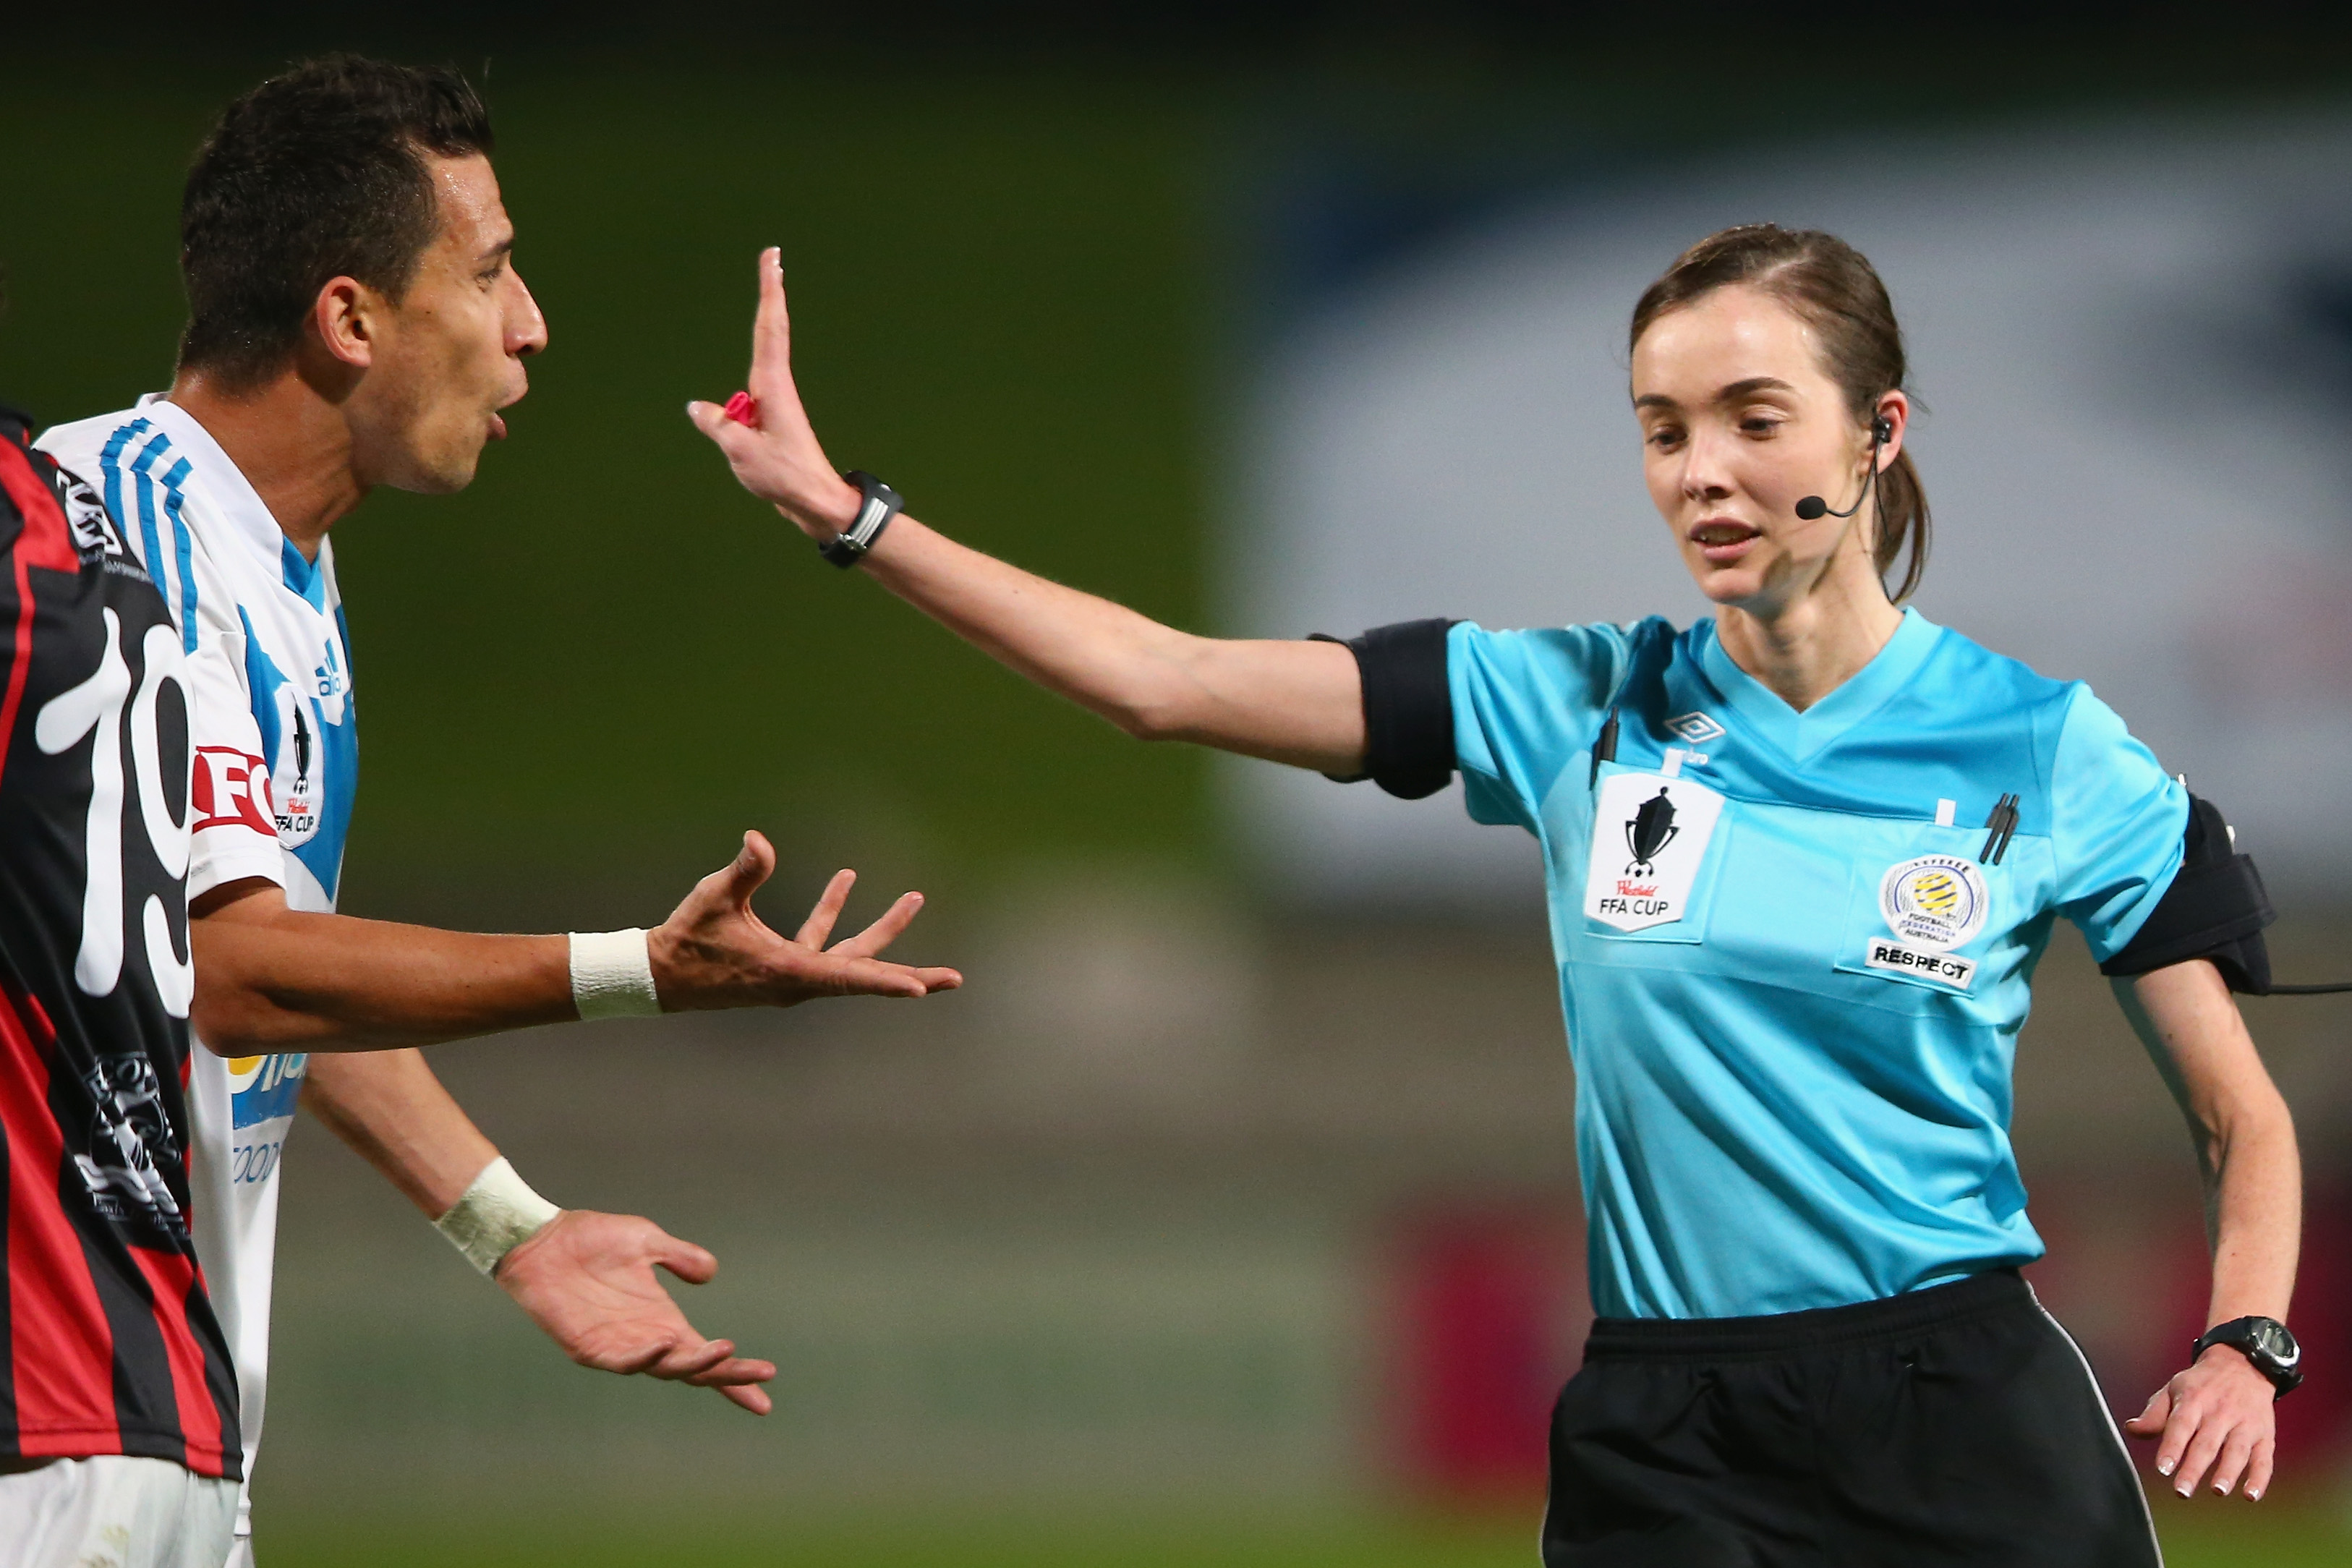 It was an historic match at Illenden Sports Centre with a female referee in charge for the first time, with Katie Patterson doing an excellent job with the whistle.